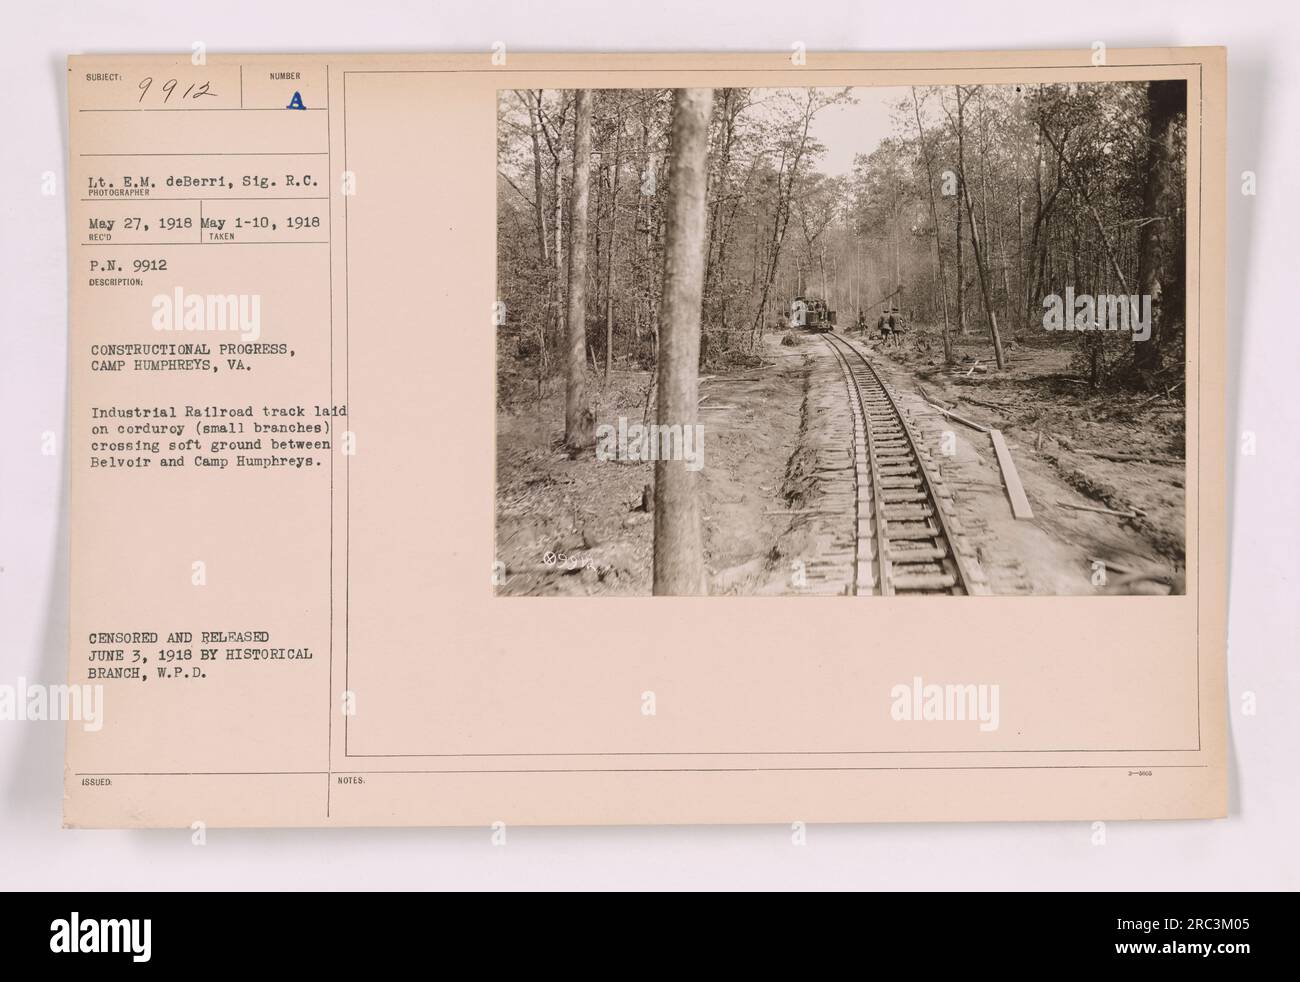 Image shows construction progress at Camp Humphreys, VA during World War One. The photograph depicts an industrial railroad track laid on corduroy (small branches), crossing soft ground between Belvoir and Camp Humphreys. The photograph was taken by Lieutenant E.M. deBerri, Signal Corps, between May 1-10, 1918 and was censored and released by the Historical Branch on June 3, 1918. Stock Photo